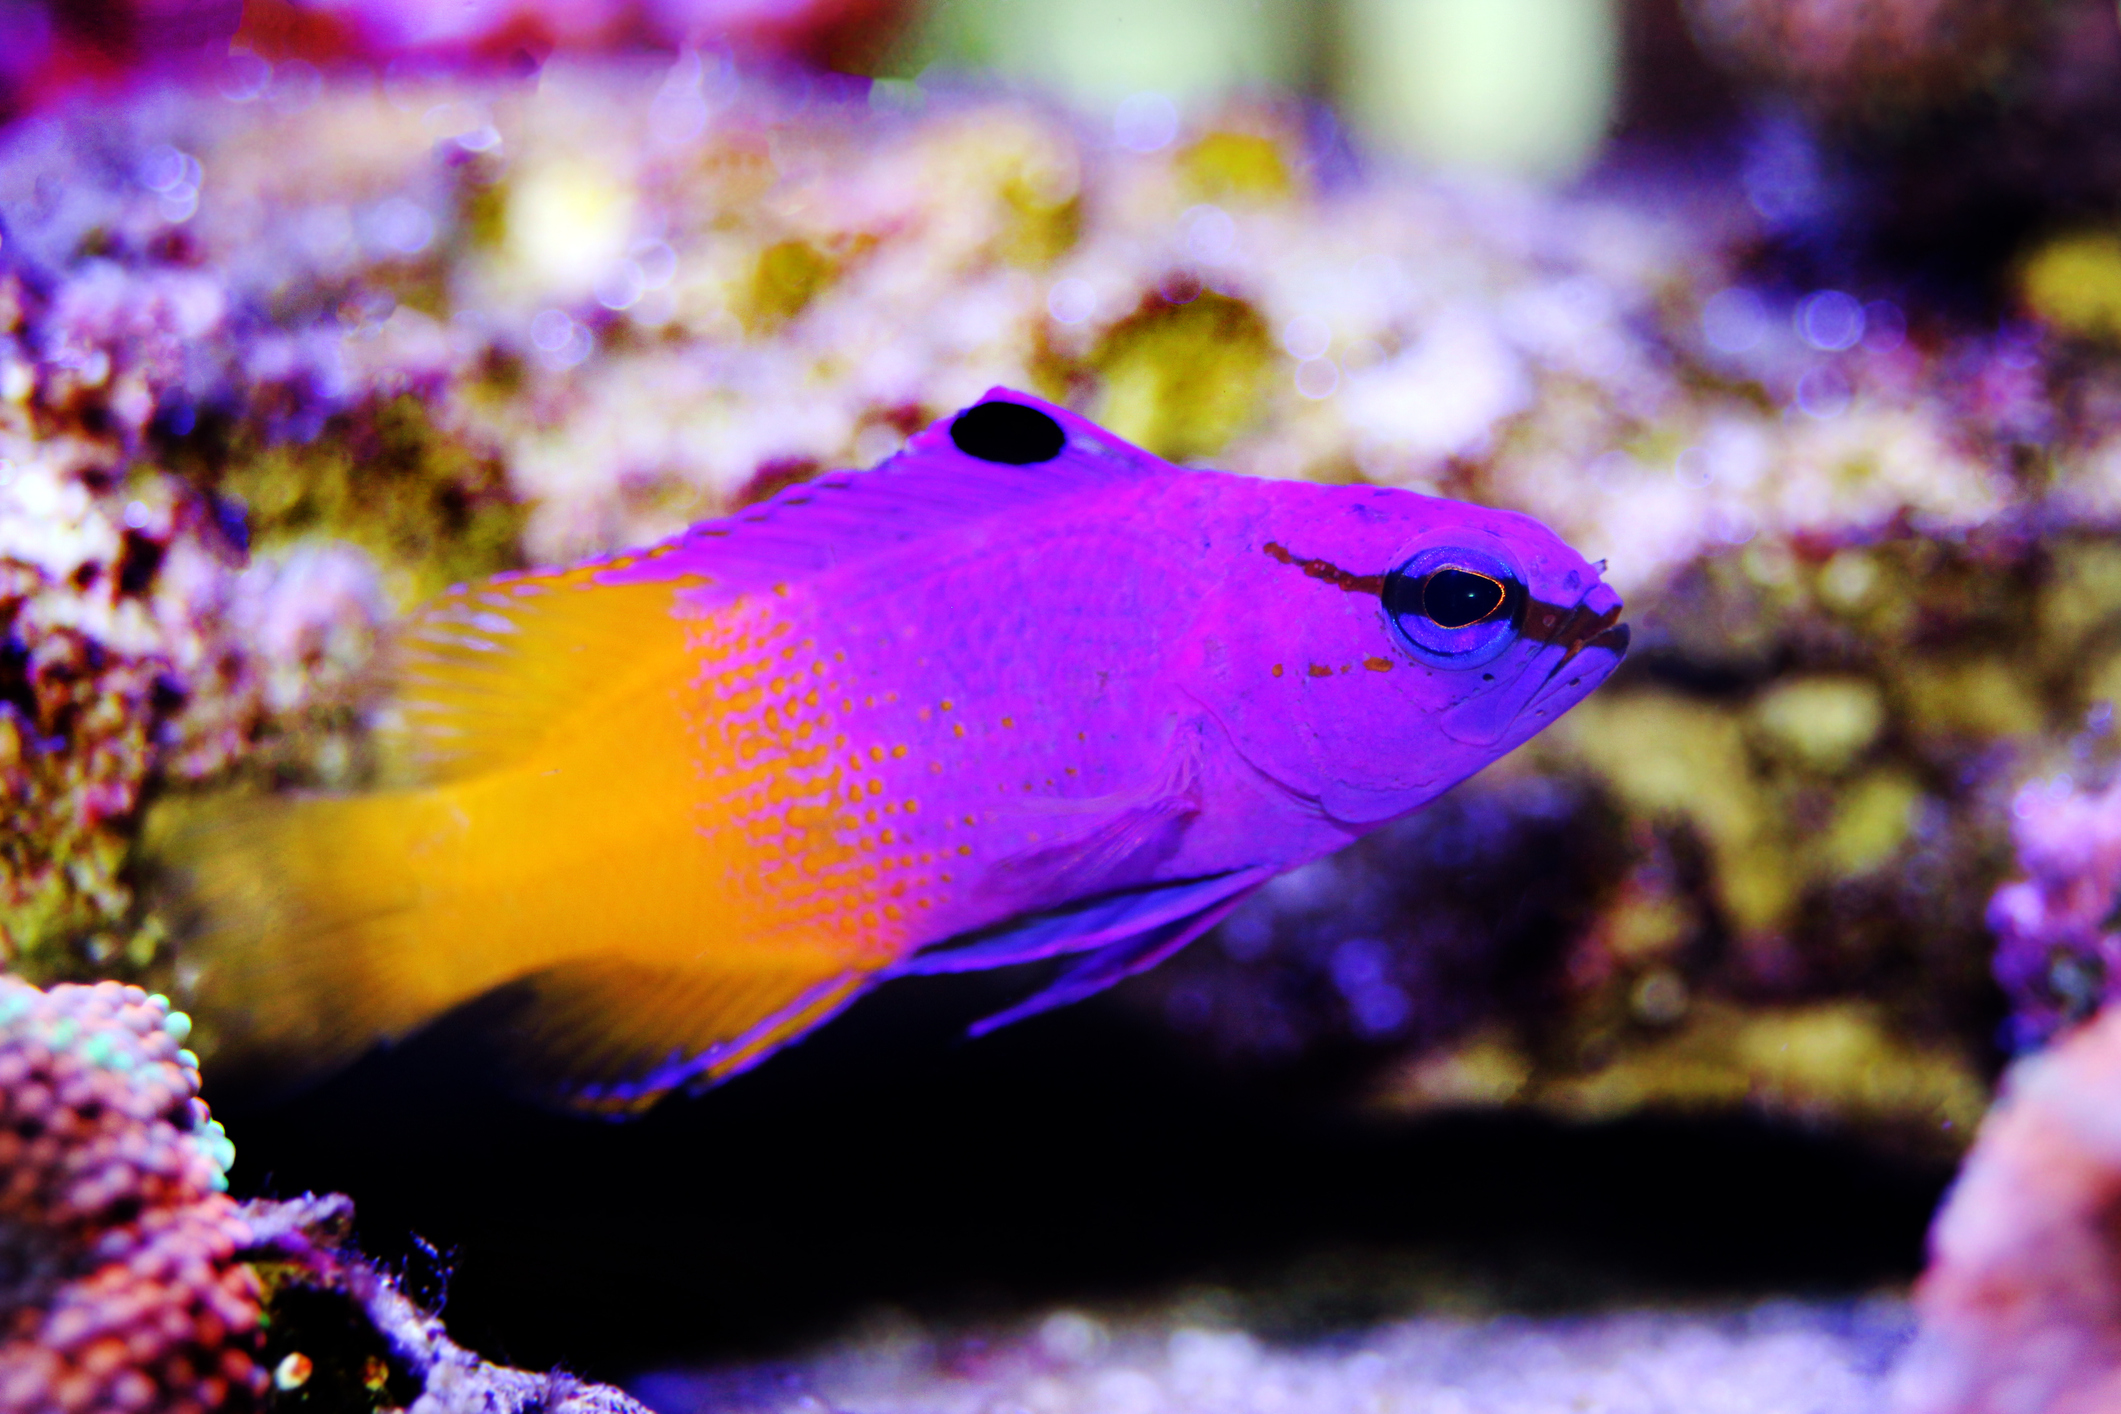 <p>  Believe it or not, there's a legit saltwater fish out there called the royal gramma. And yep, it's every bit as regal as it sounds! With a personality that's super friendly and a standout appearance, they're a treat to have in any tank. Their vibrant purple and yellow colors make them absolute show-stoppers. </p> <p>  Just a heads-up, though — while they're pretty friendly with their tankmates, they're not the biggest fans of their own kind. Keep one solo fish of this species and give just one royal gramma the crown to rule the tank. </p>